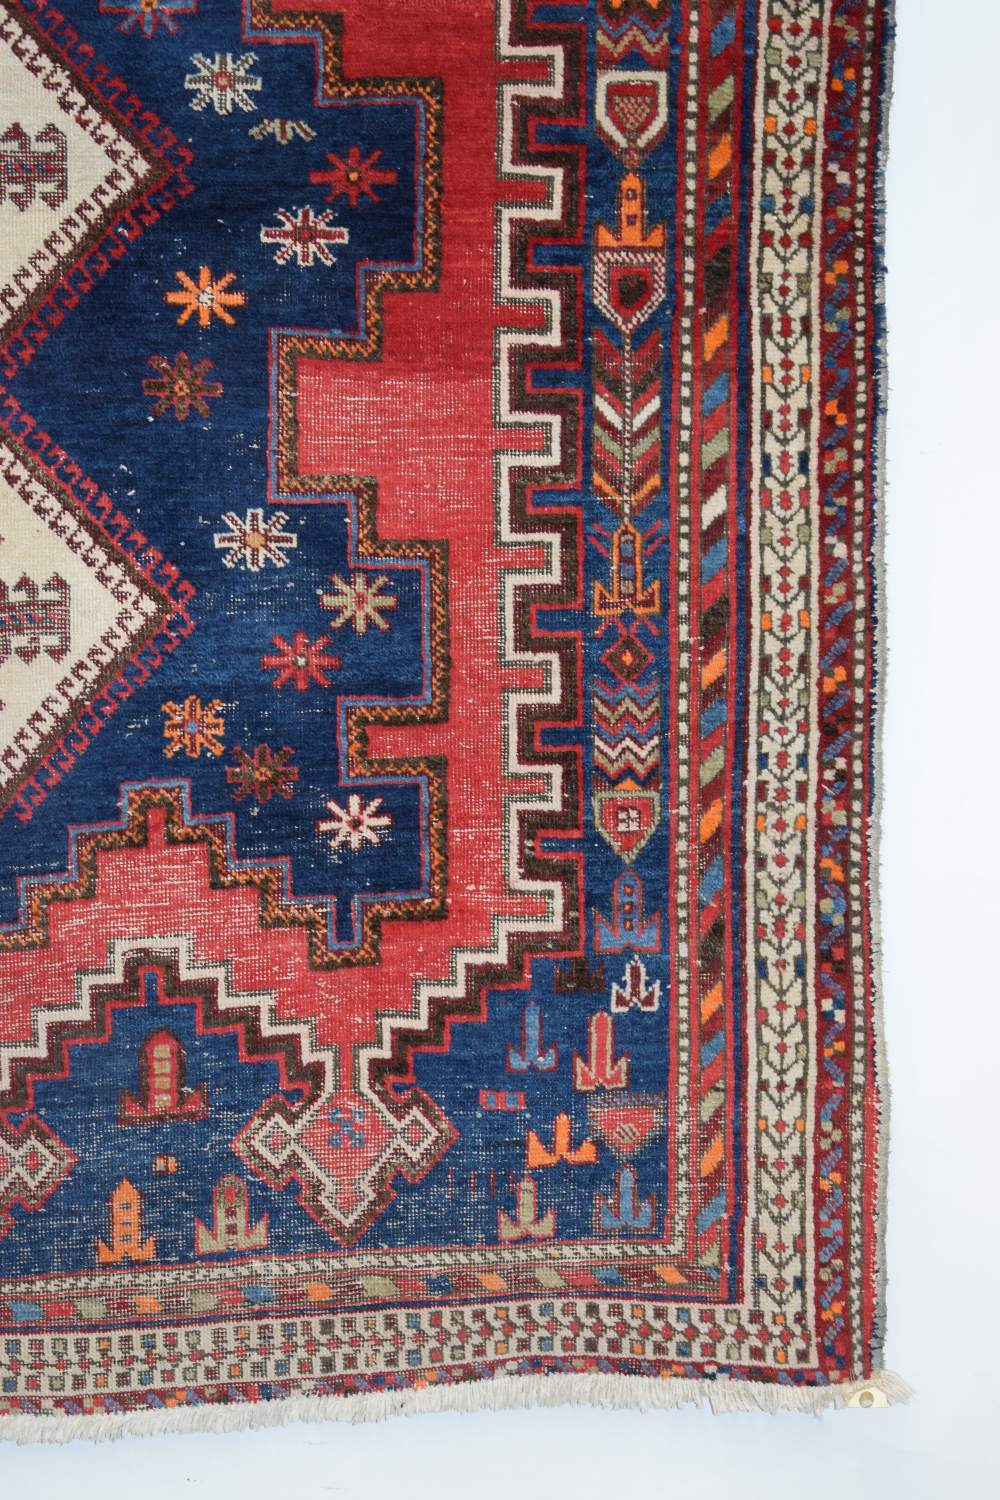 Afshar rug, Kerman area, south east Persia, circa 1930s-40s, 6ft. 8in. X 5ft. 1in. 2.03m. X 1.55m. - Image 2 of 9